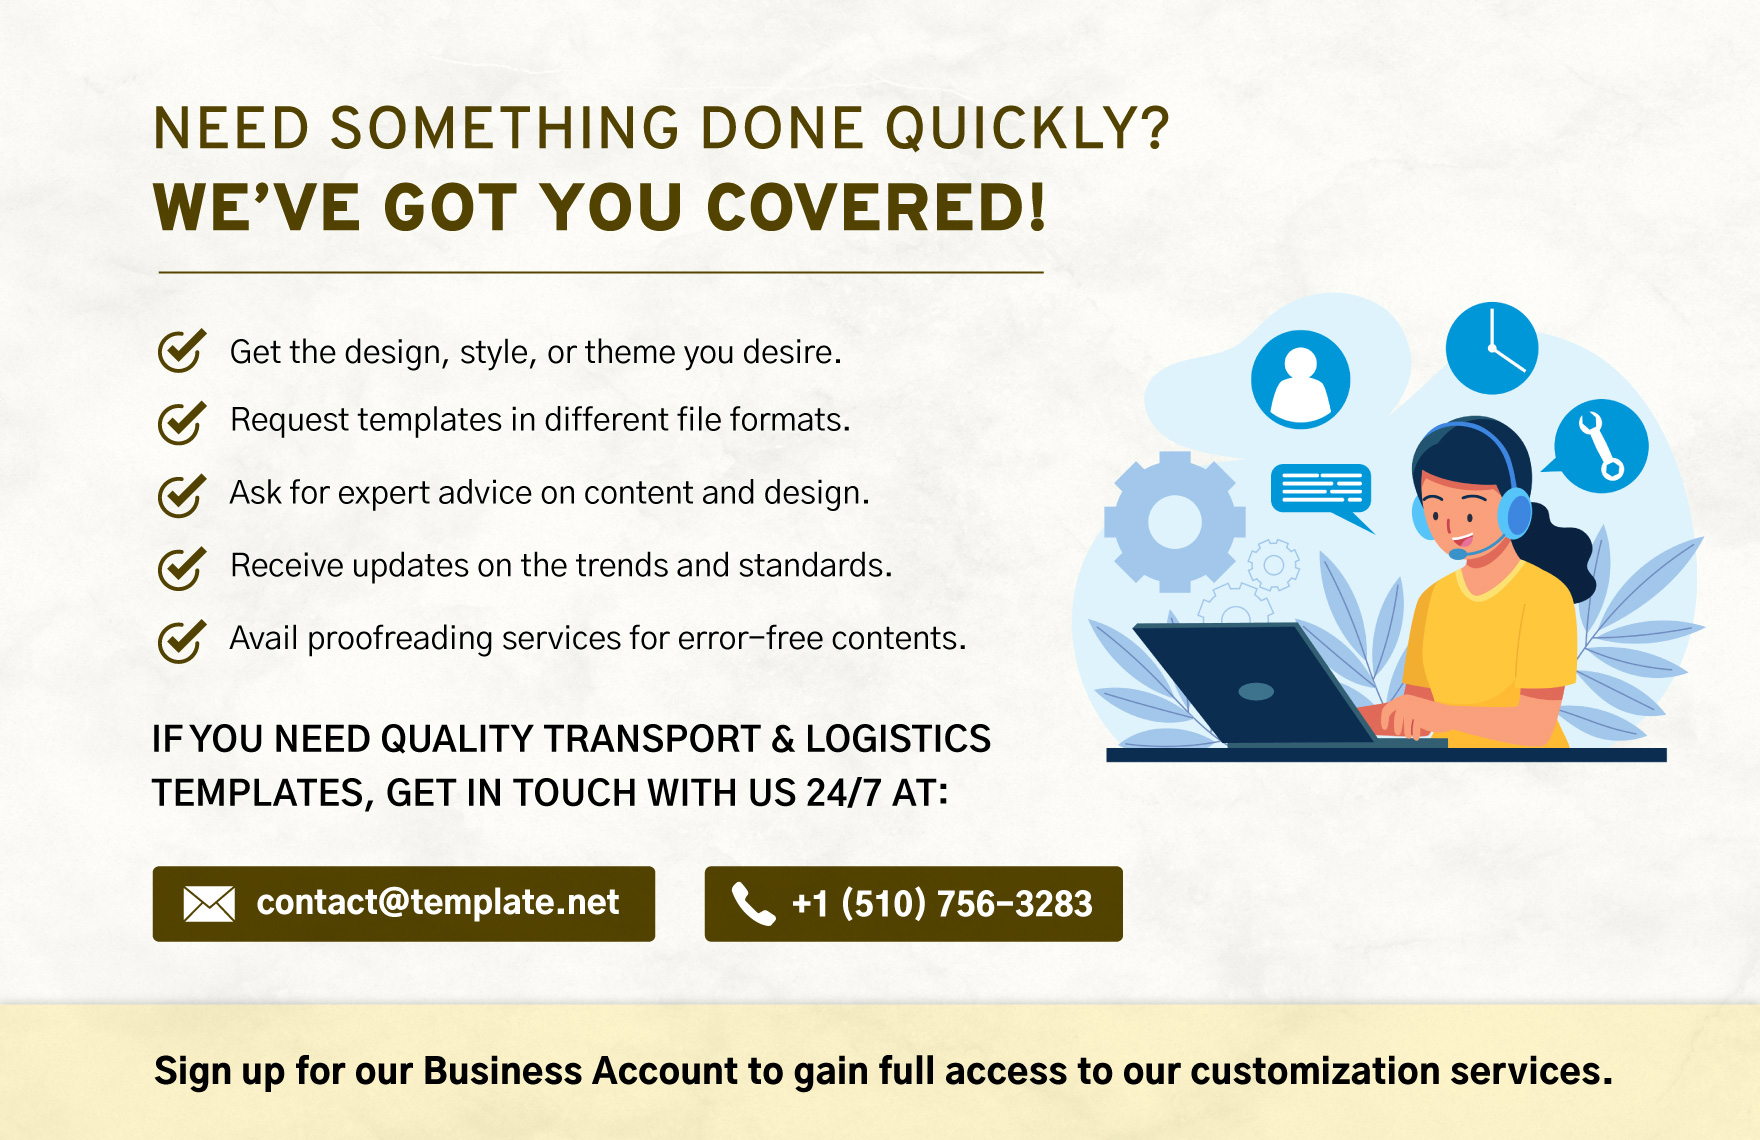 Transport and Logistics Client Profile Template